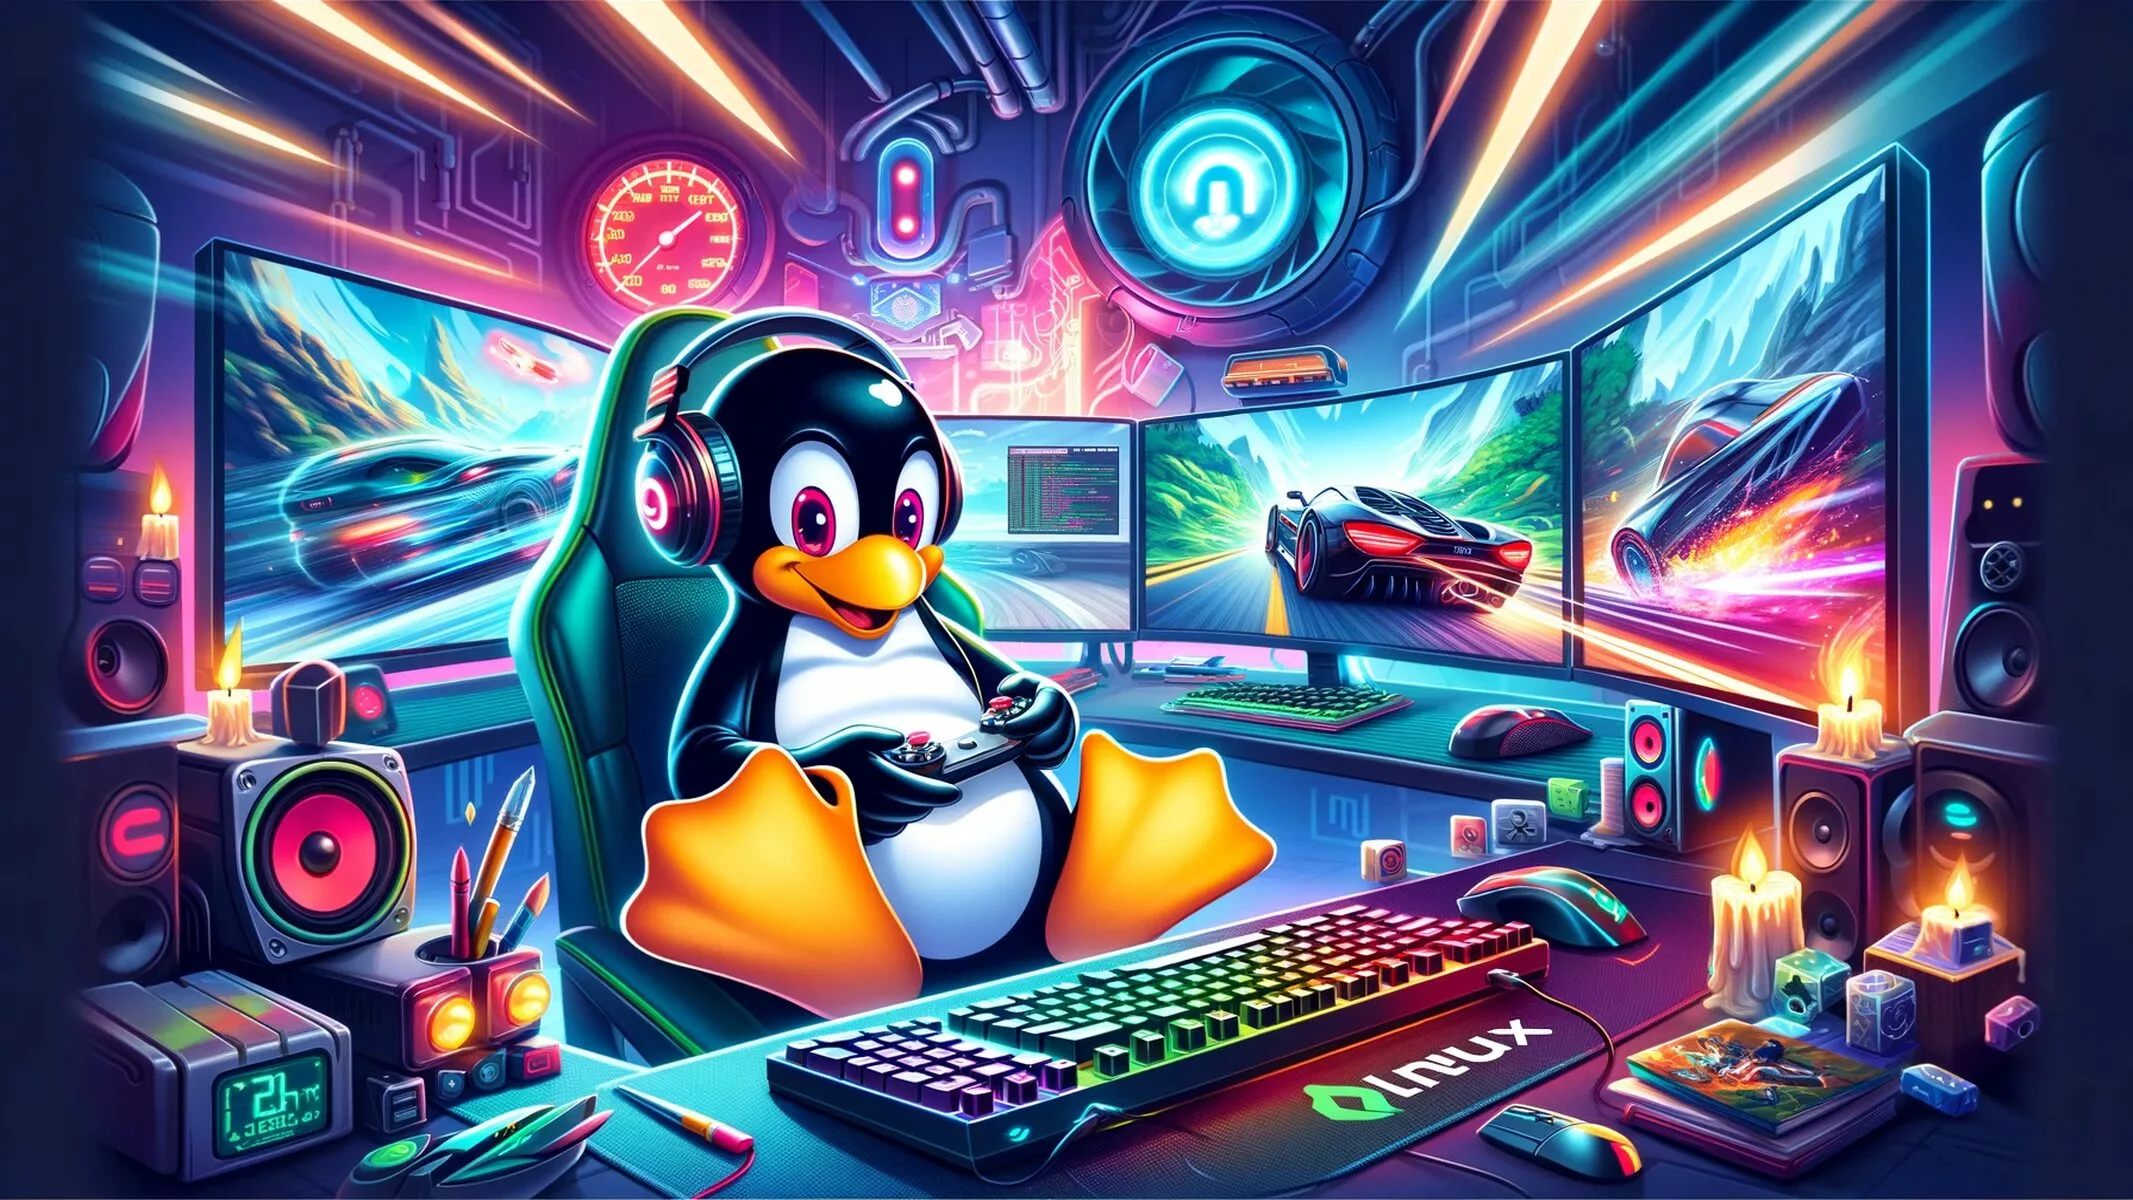 The Linux mascot Tux, a cheerful and animated penguin, is sitting in a high-tech gaming setup, intensely focused on playing a game on a PC powered by Linux